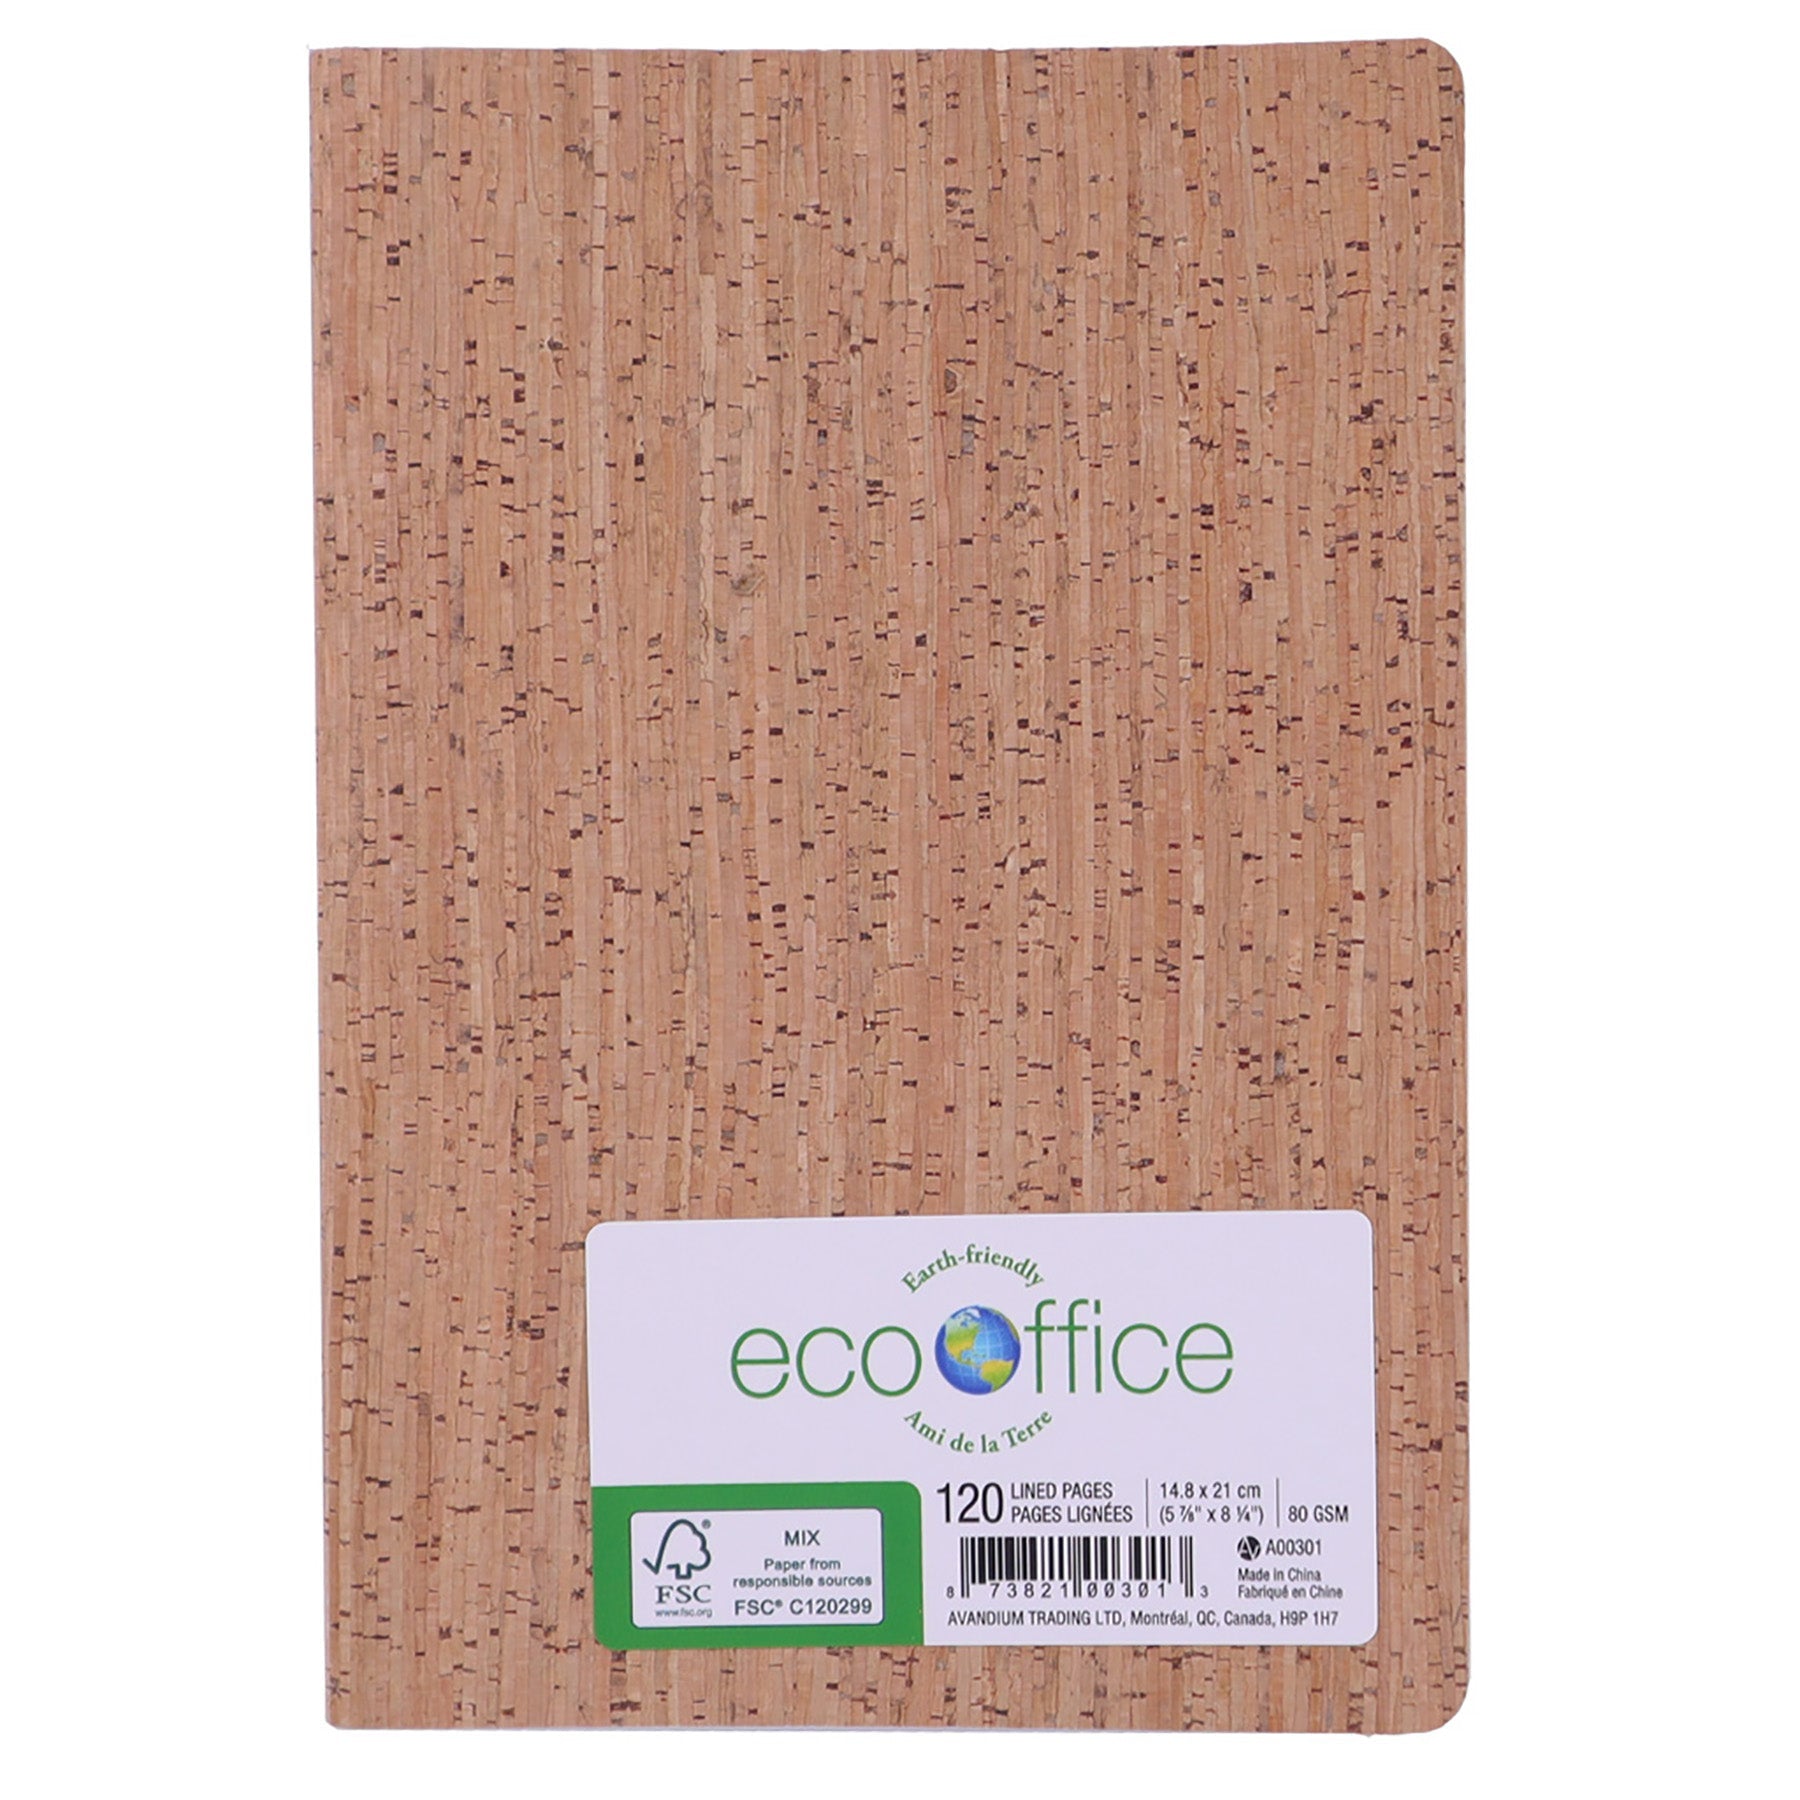 EcoOffice 100% Recycled Cork Cover Notebook A5 120 Lined Pages 5.87x8.25in